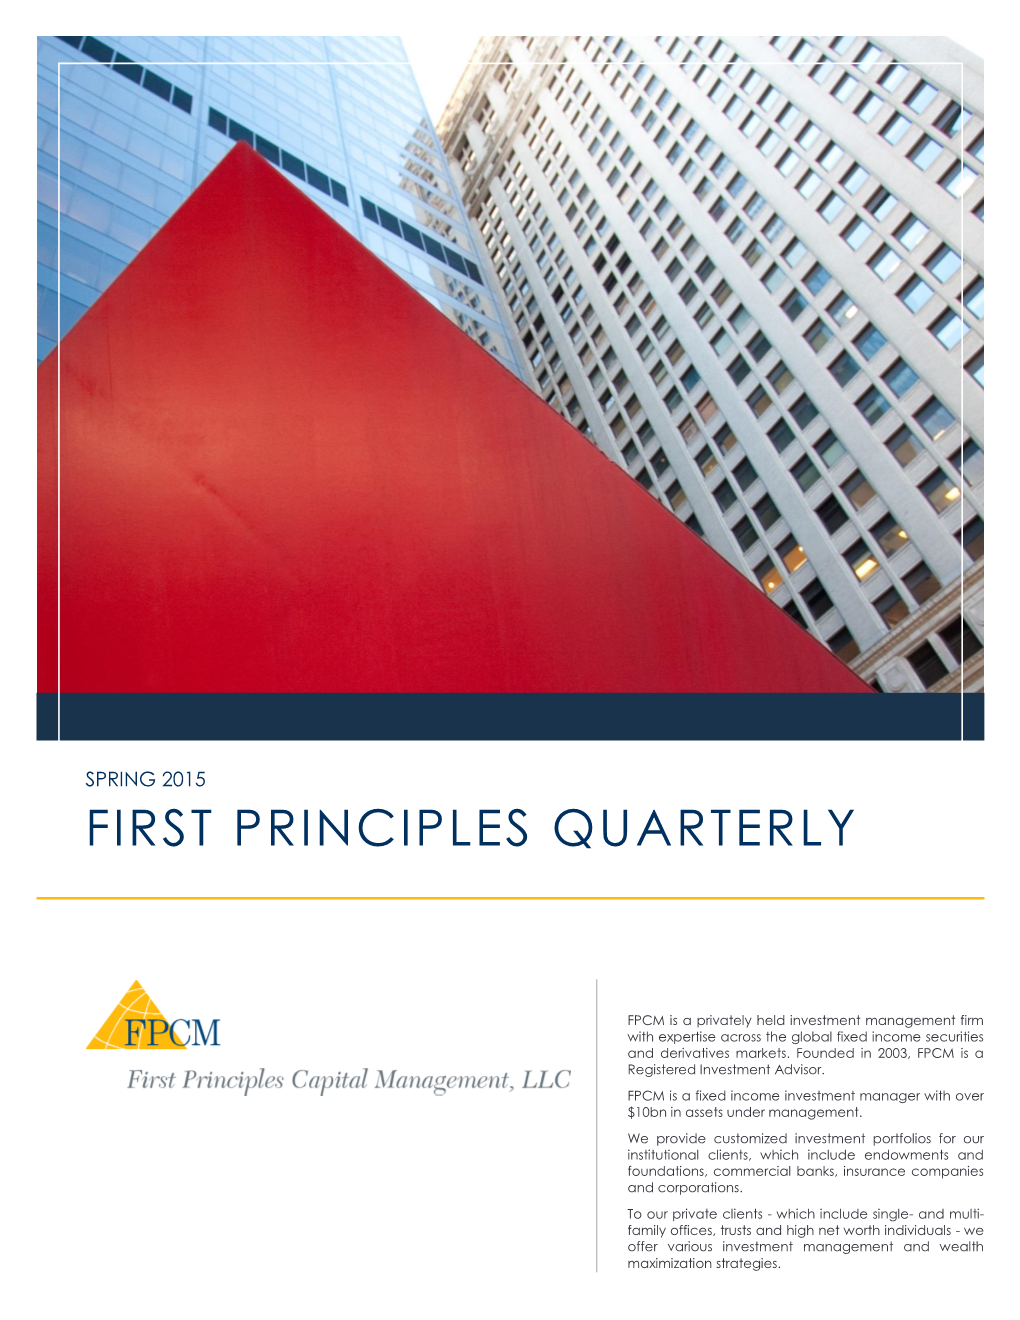 View the First Principles Quarterly